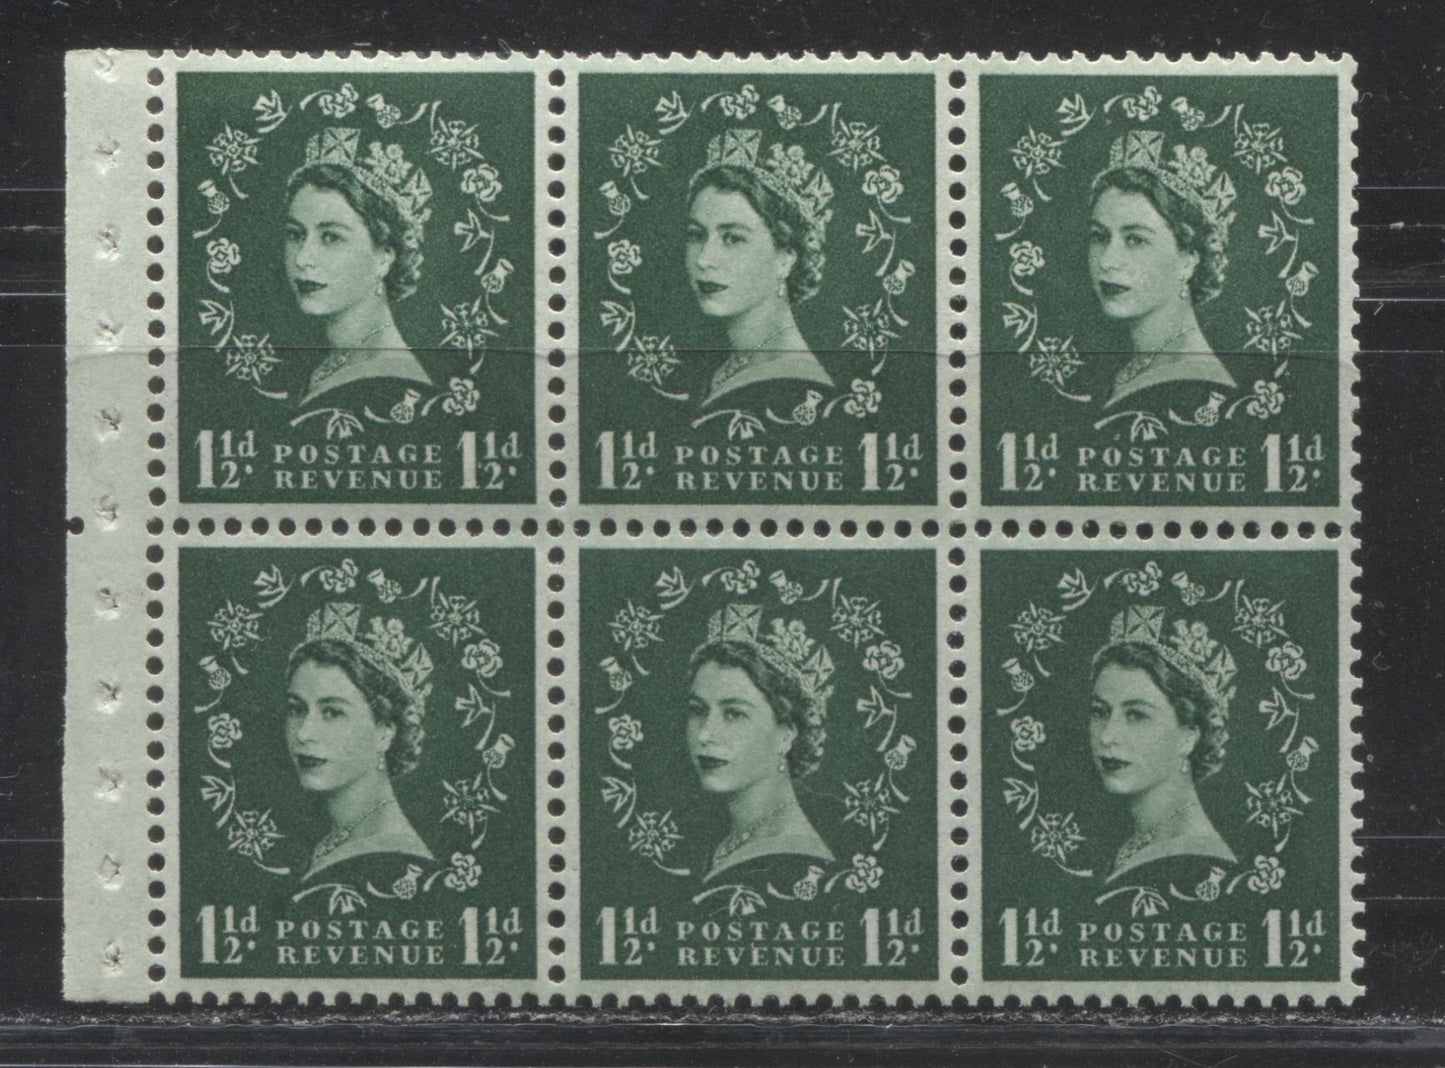 Great Britain SG#M12 3/- Deep Red & Black Cover 1956-1959 Wilding Issue, A Complete Booklet With Mixed Upright & Inverted Multiple St. Edward's Crown Watermark, Panes of 6, Type B GPO Cypher, February 1959